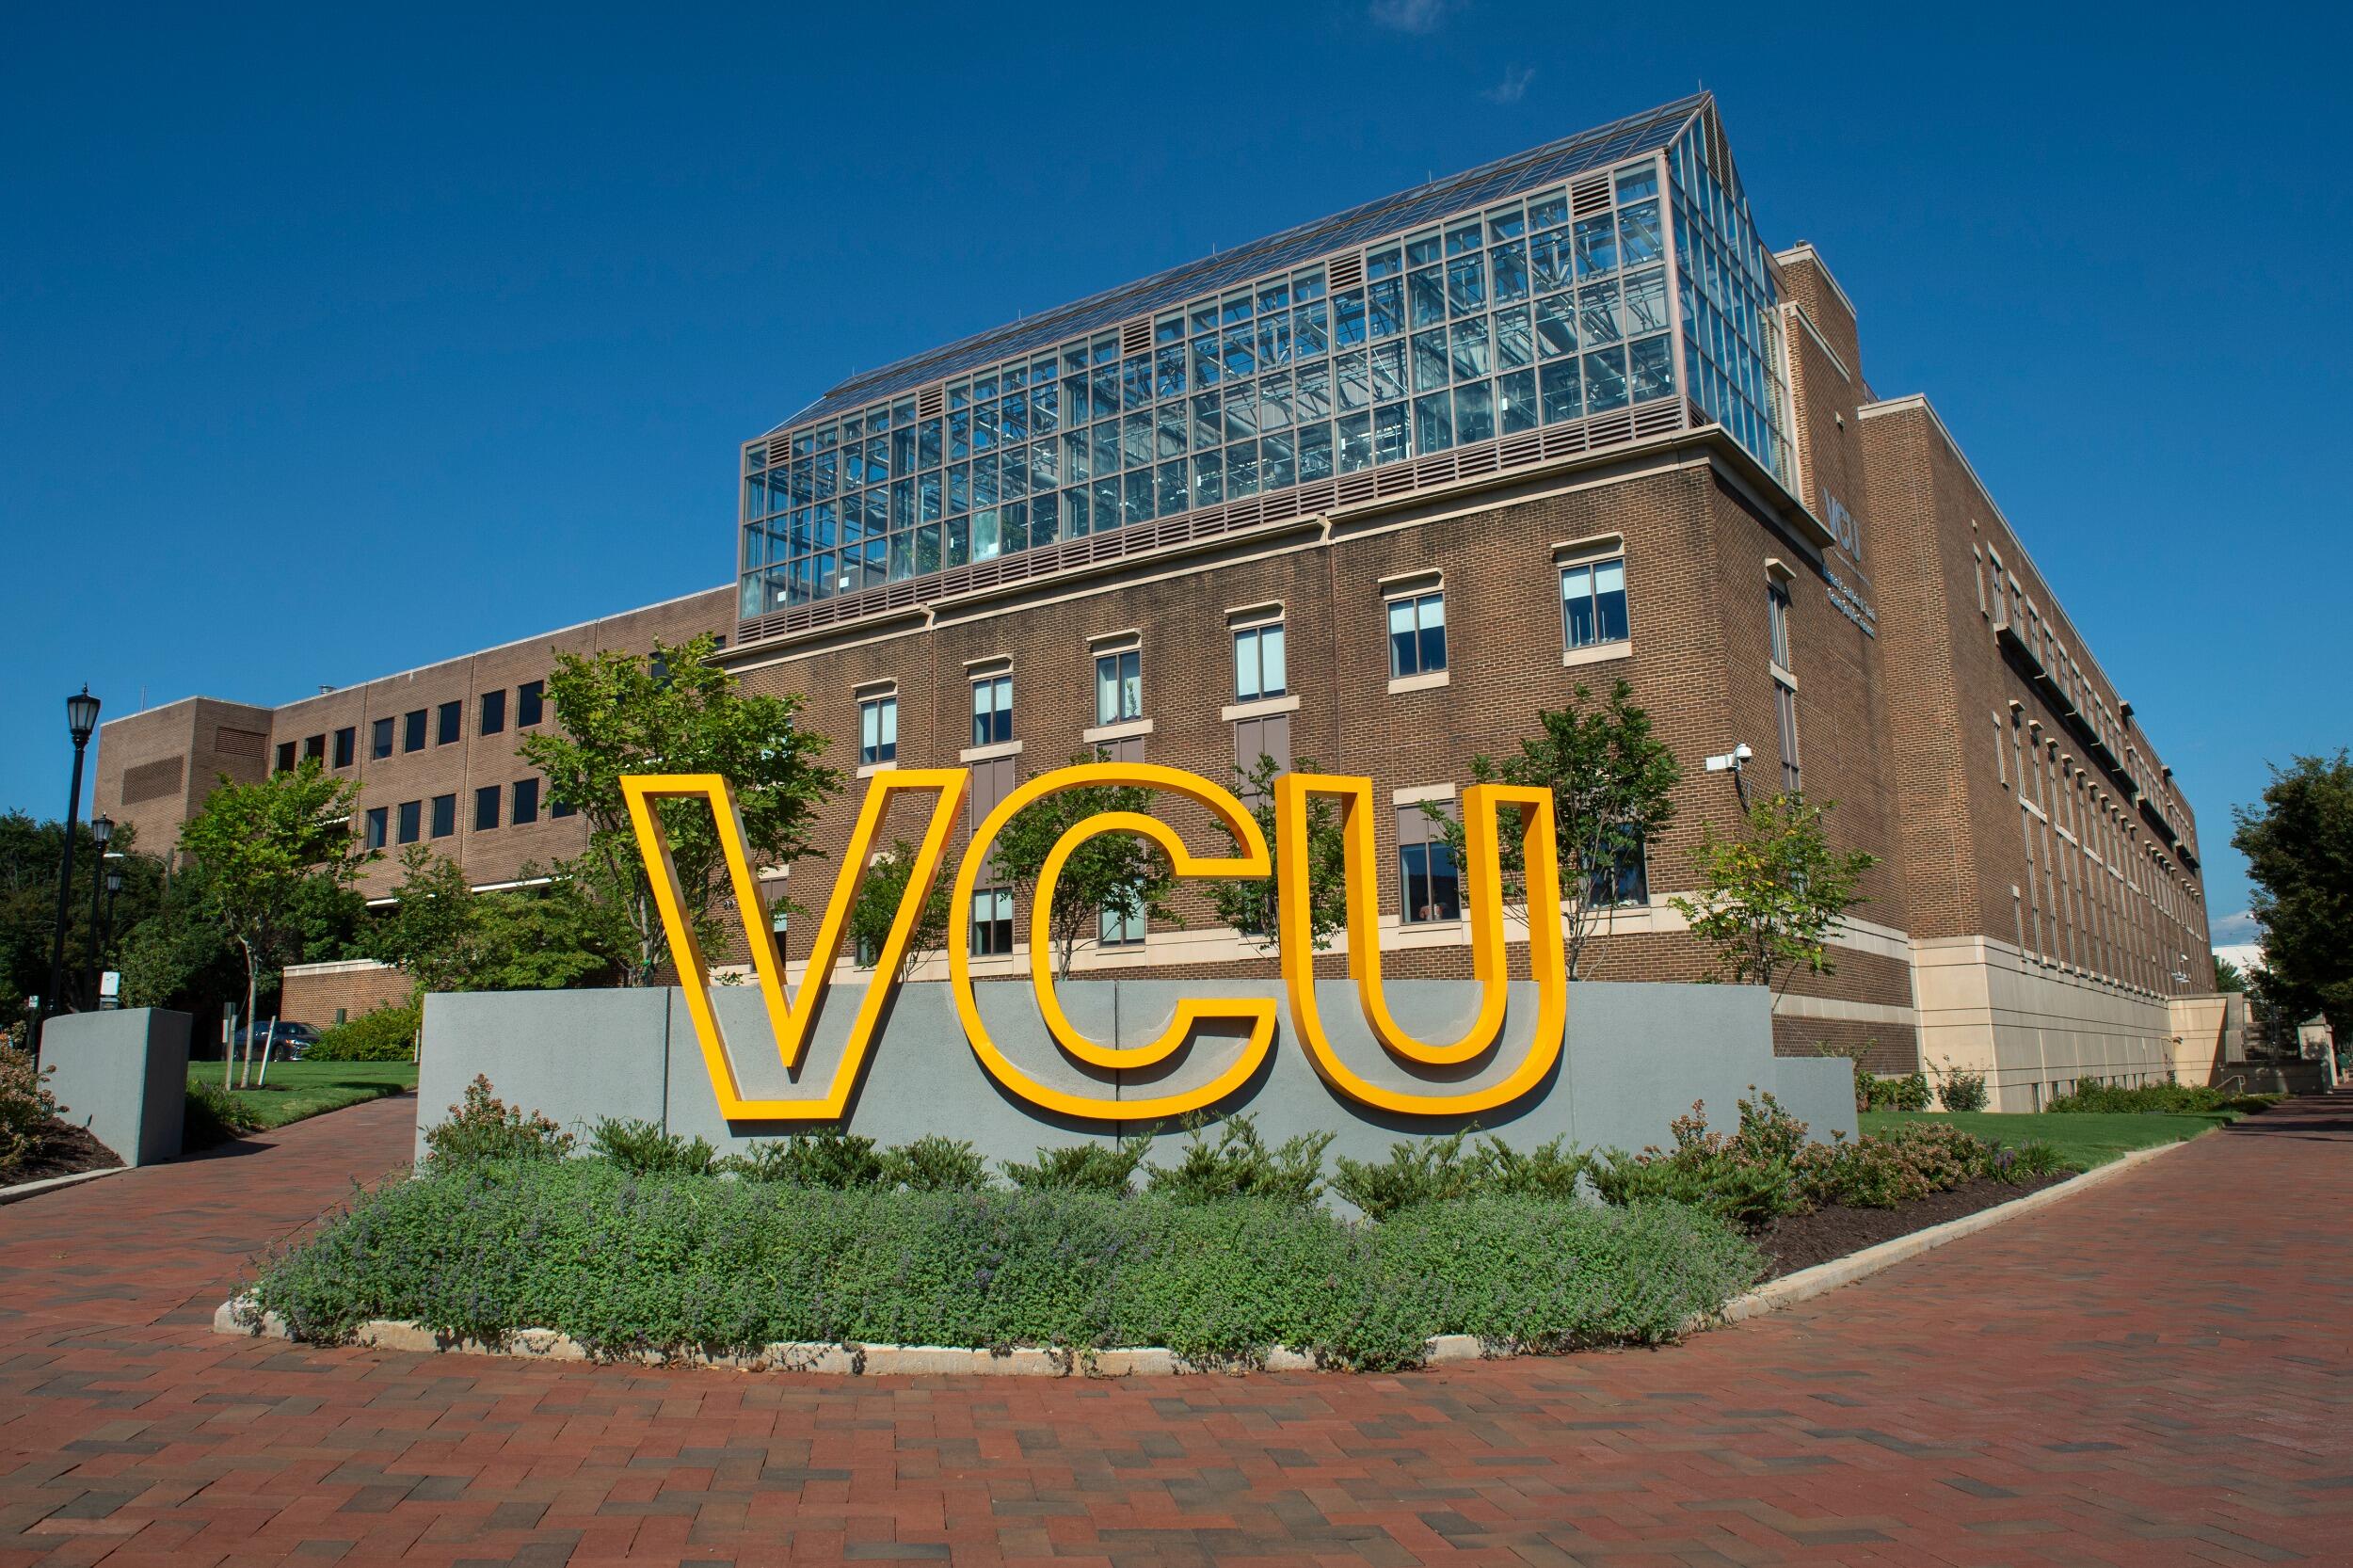 A large, sculptural sign that spells VCU in front of the Trani Building.